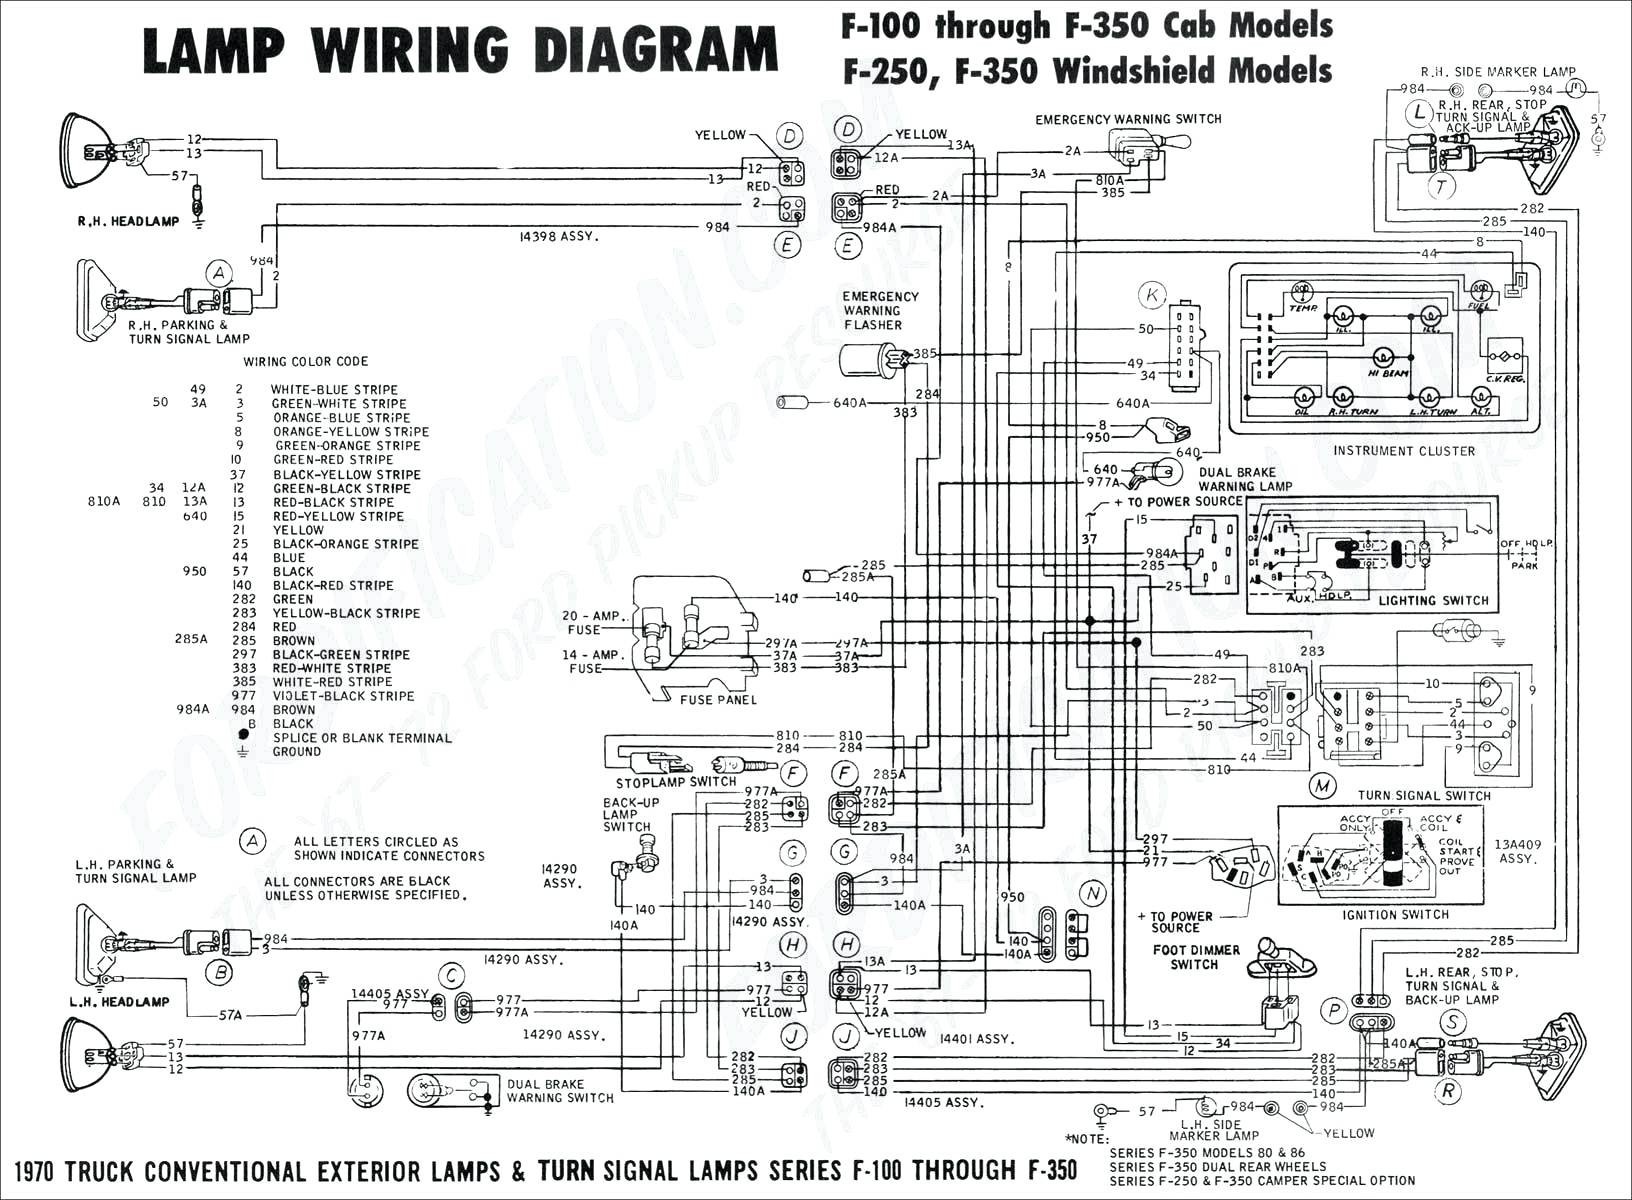 2005 Jeep Grand Cherokee Wiring Diagram Fresh 2000 Ford Mustang Stereo Wiring Diagram Autos Weblog Wire Center